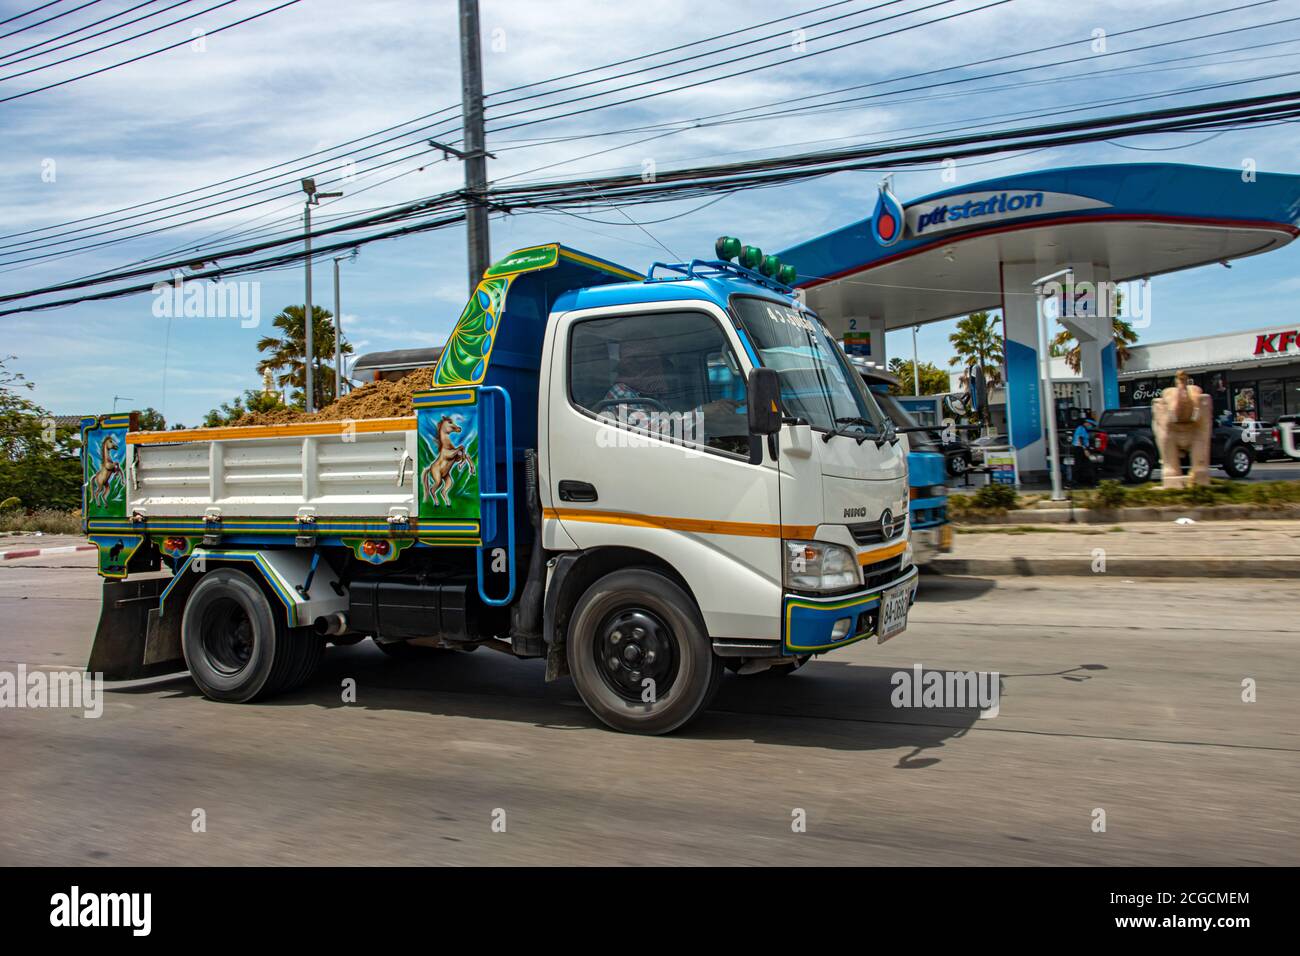 SAMUT PRAKAN, THAILAND, JUN 23 2020, A small lorry with load ride on a street Stock Photo